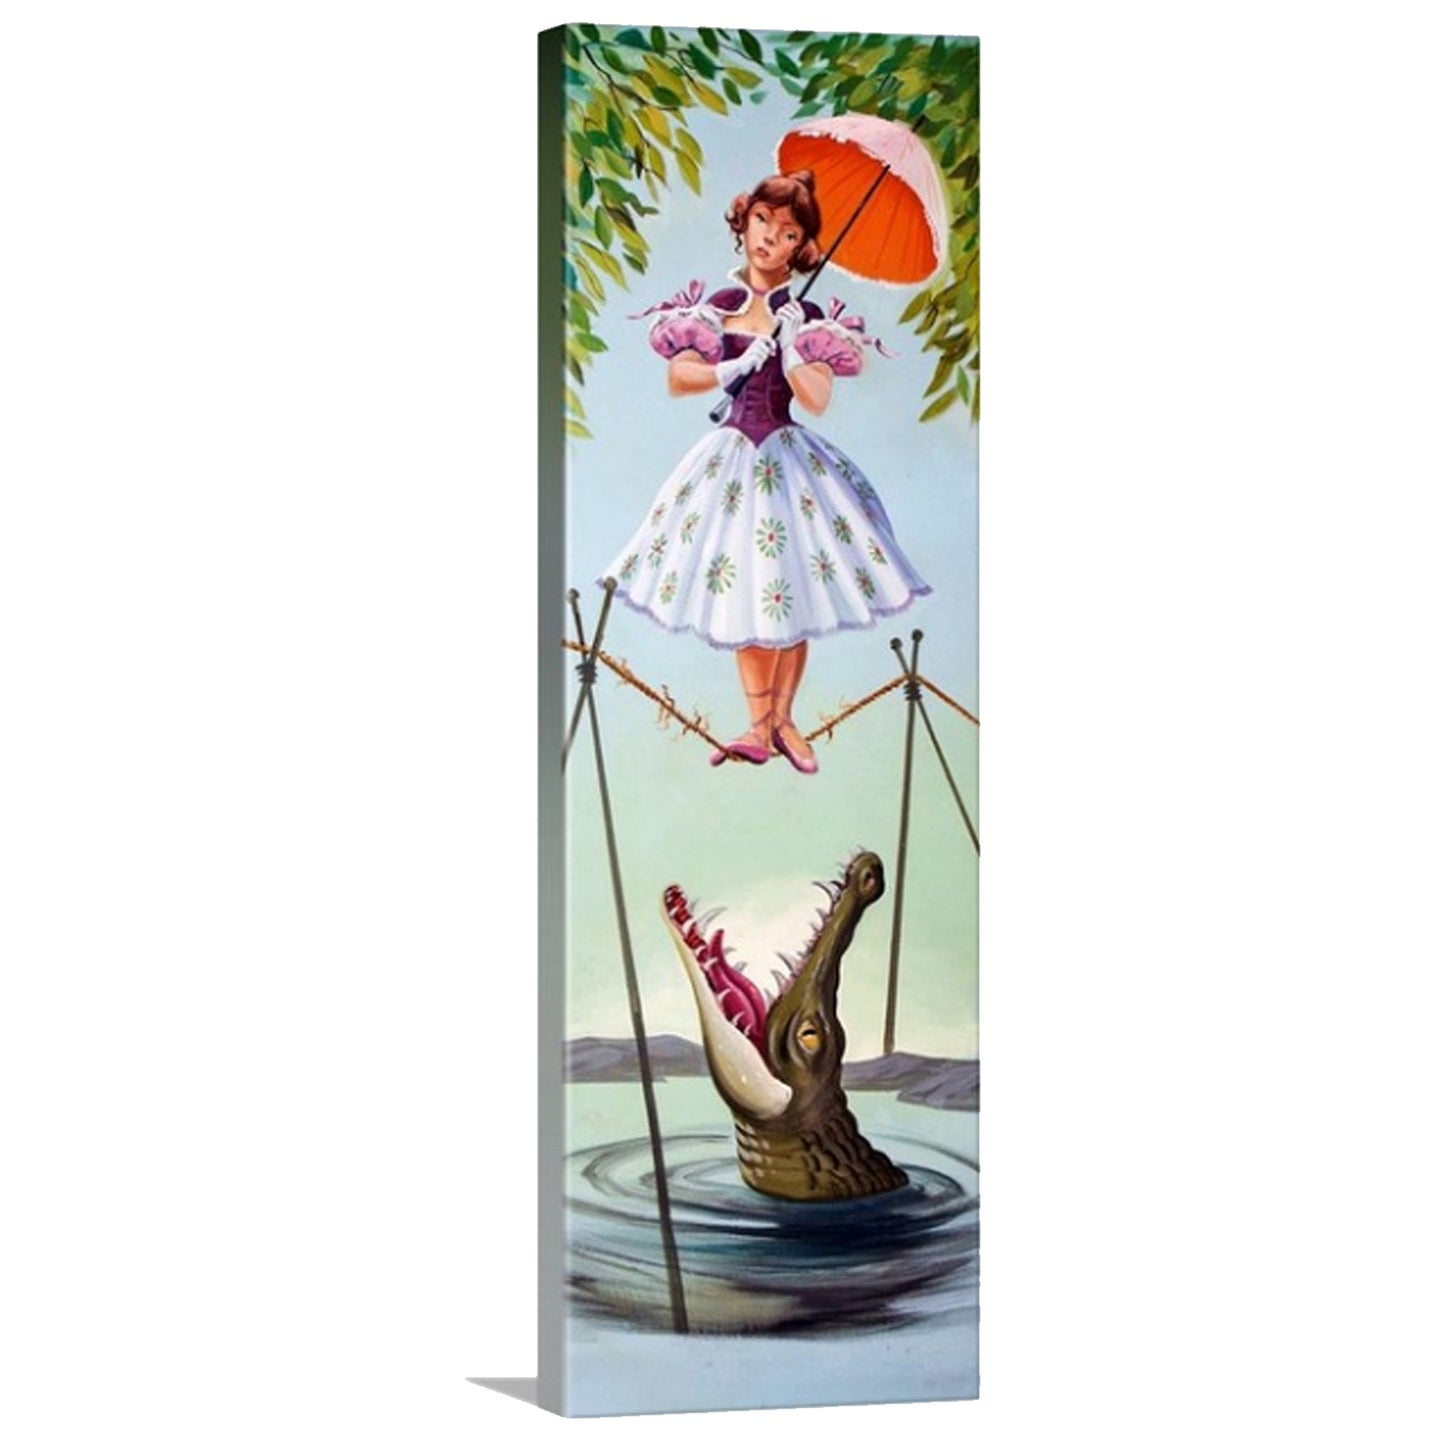 9"x12" Haunted Mansion Stretch Portrait Canvas - Haunted Mansion Inspired Stretching Paintings